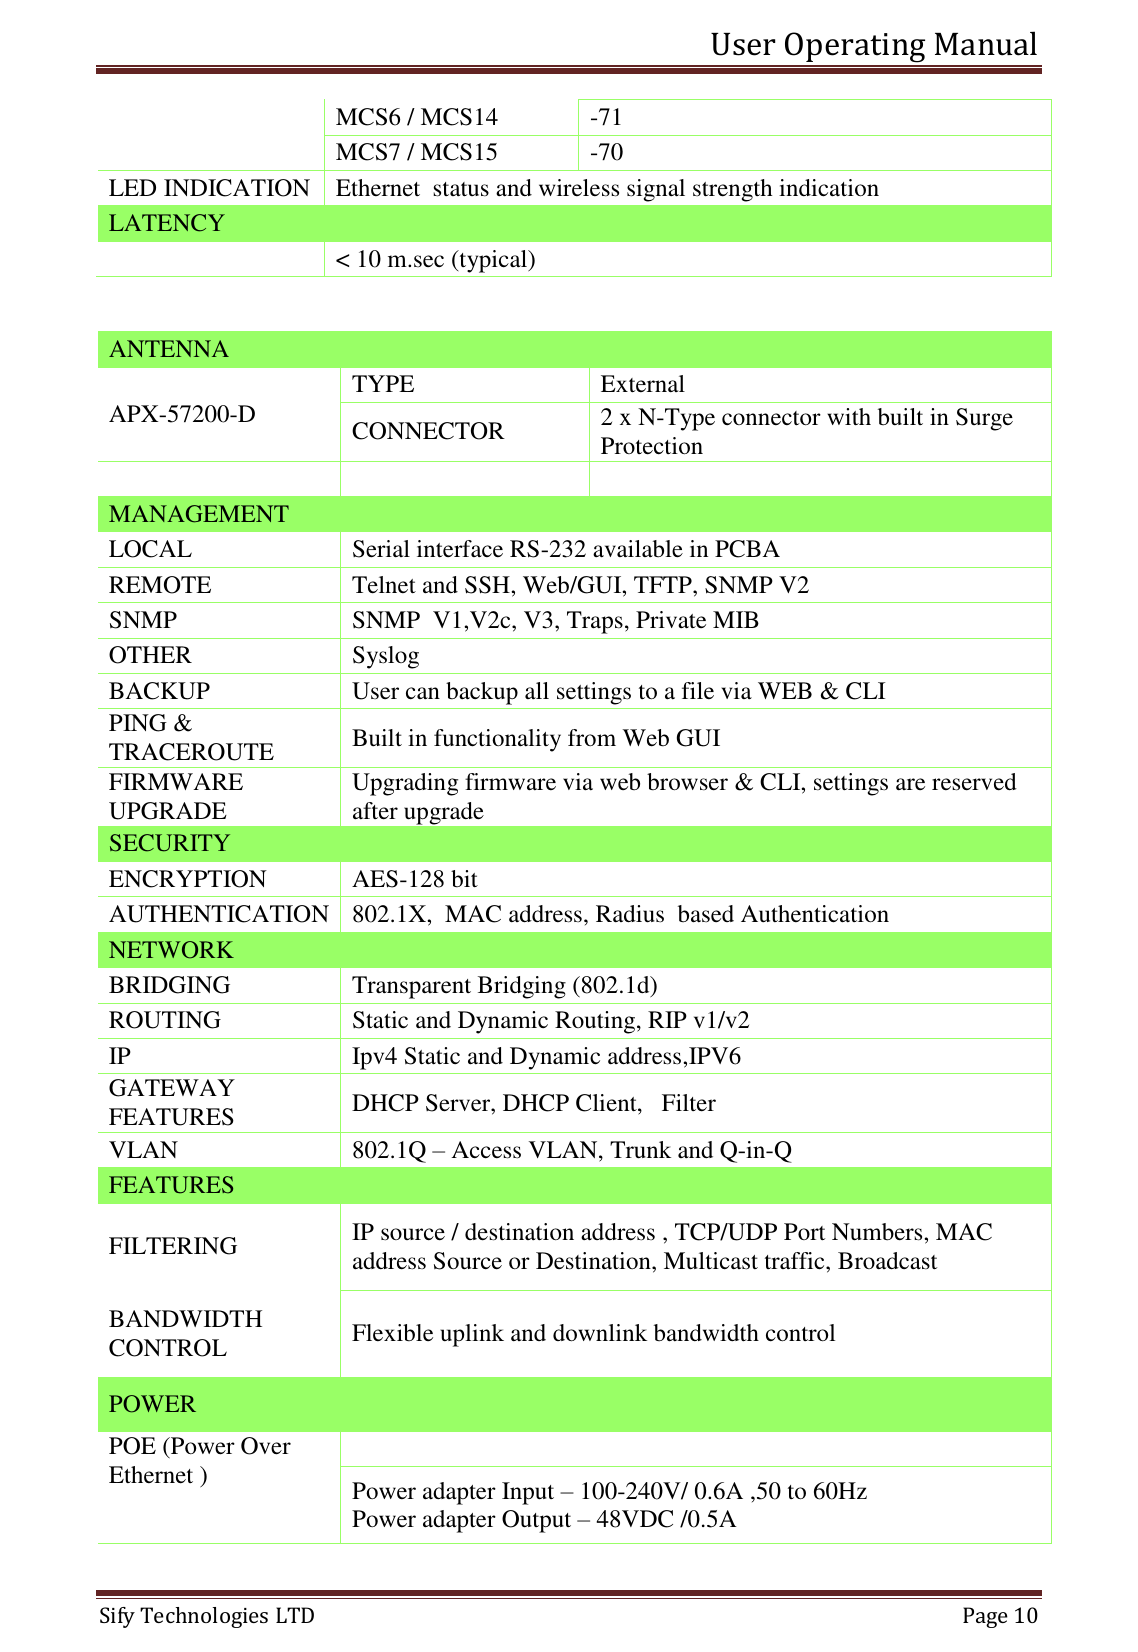 User Operating Manual   Sify Technologies LTD   Page 10  MCS6 / MCS14 -71   MCS7 / MCS15 -70 LED INDICATION Ethernet  status and wireless signal strength indication LATENCY   &lt; 10 m.sec (typical)  ANTENNA APX-57200-D TYPE External CONNECTOR 2 x N-Type connector with built in Surge Protection    MANAGEMENT LOCAL Serial interface RS-232 available in PCBA REMOTE Telnet and SSH, Web/GUI, TFTP, SNMP V2 SNMP SNMP  V1,V2c, V3, Traps, Private MIB OTHER Syslog BACKUP User can backup all settings to a file via WEB &amp; CLI PING &amp; TRACEROUTE Built in functionality from Web GUI FIRMWARE UPGRADE Upgrading firmware via web browser &amp; CLI, settings are reserved after upgrade SECURITY ENCRYPTION AES-128 bit AUTHENTICATION 802.1X,  MAC address, Radius  based Authentication NETWORK BRIDGING Transparent Bridging (802.1d) ROUTING Static and Dynamic Routing, RIP v1/v2 IP Ipv4 Static and Dynamic address,IPV6 GATEWAY FEATURES DHCP Server, DHCP Client,   Filter VLAN 802.1Q – Access VLAN, Trunk and Q-in-Q FEATURES FILTERING IP source / destination address , TCP/UDP Port Numbers, MAC address Source or Destination, Multicast traffic, Broadcast BANDWIDTH CONTROL Flexible uplink and downlink bandwidth control POWER POE (Power Over Ethernet )    Power adapter Input – 100-240V/ 0.6A ,50 to 60Hz Power adapter Output – 48VDC /0.5A 